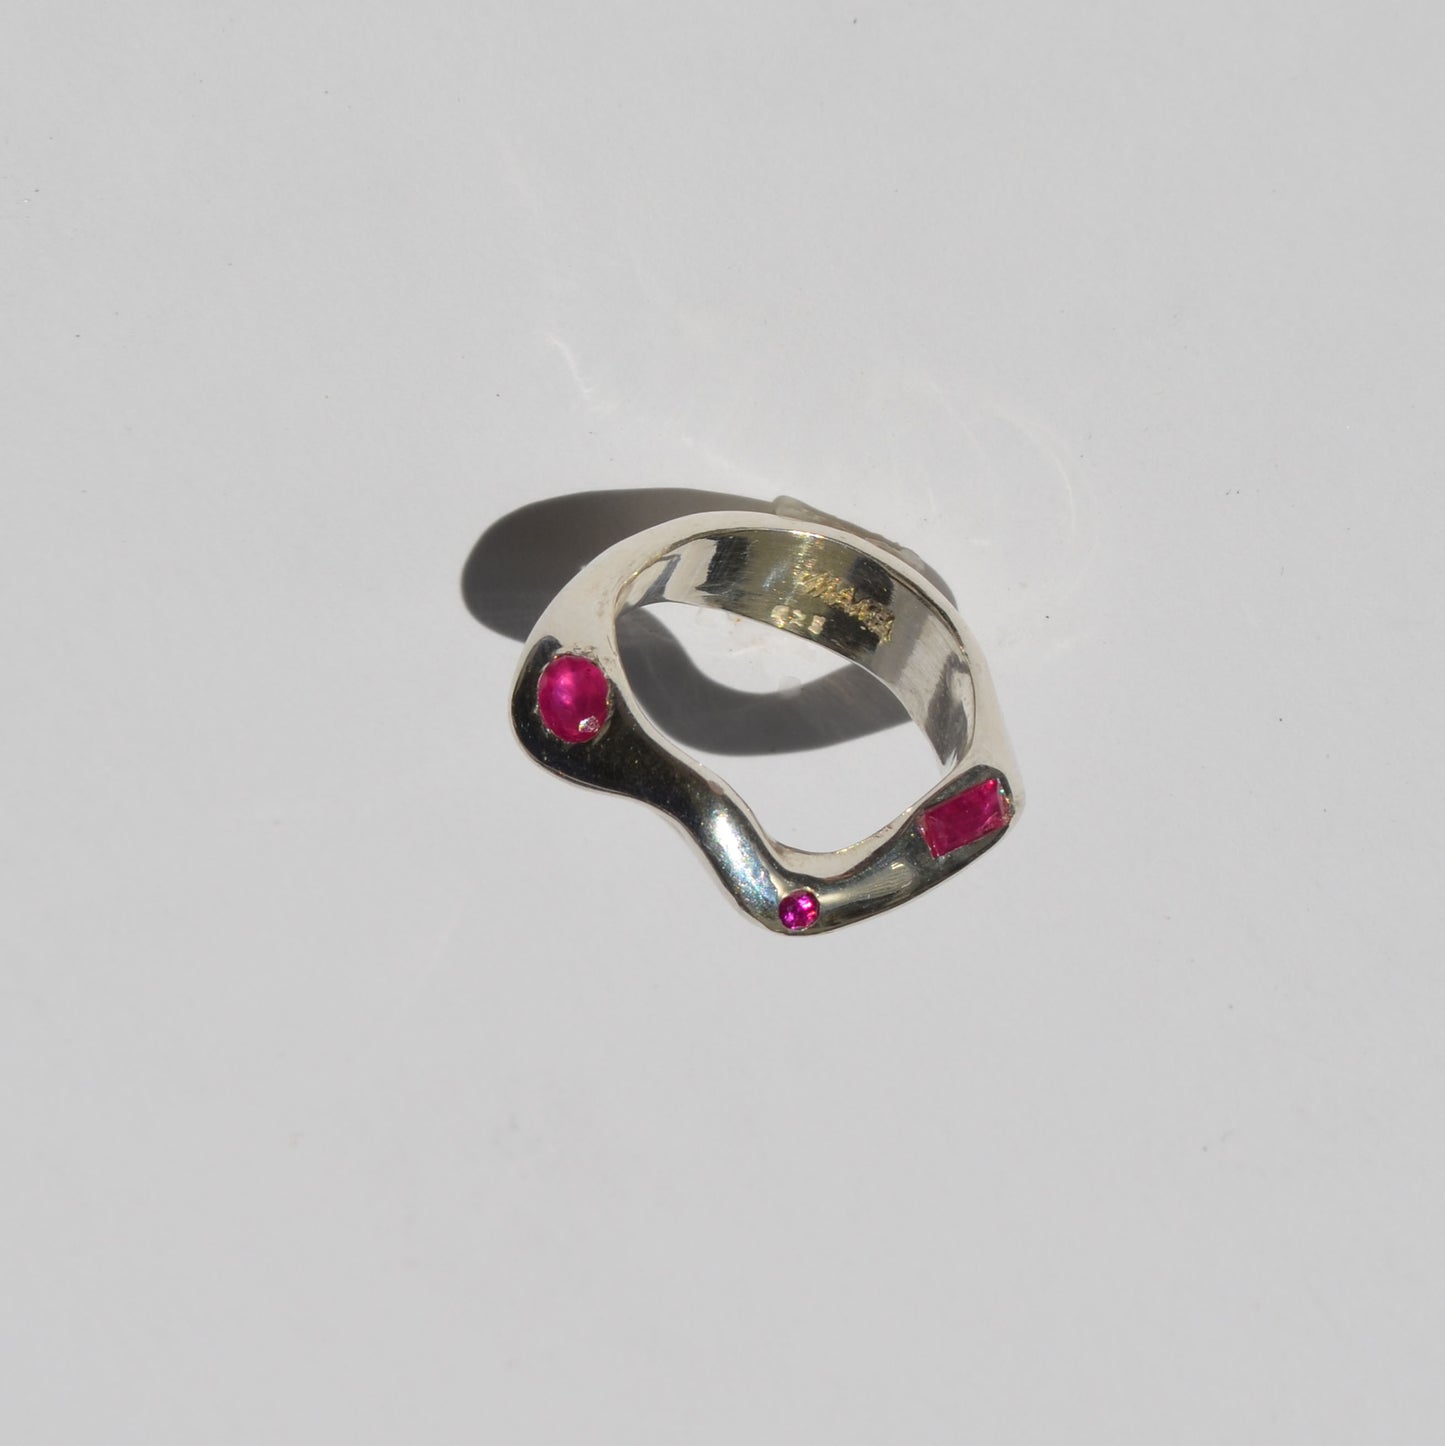 Juiced Ripple Ring - pretty in pink